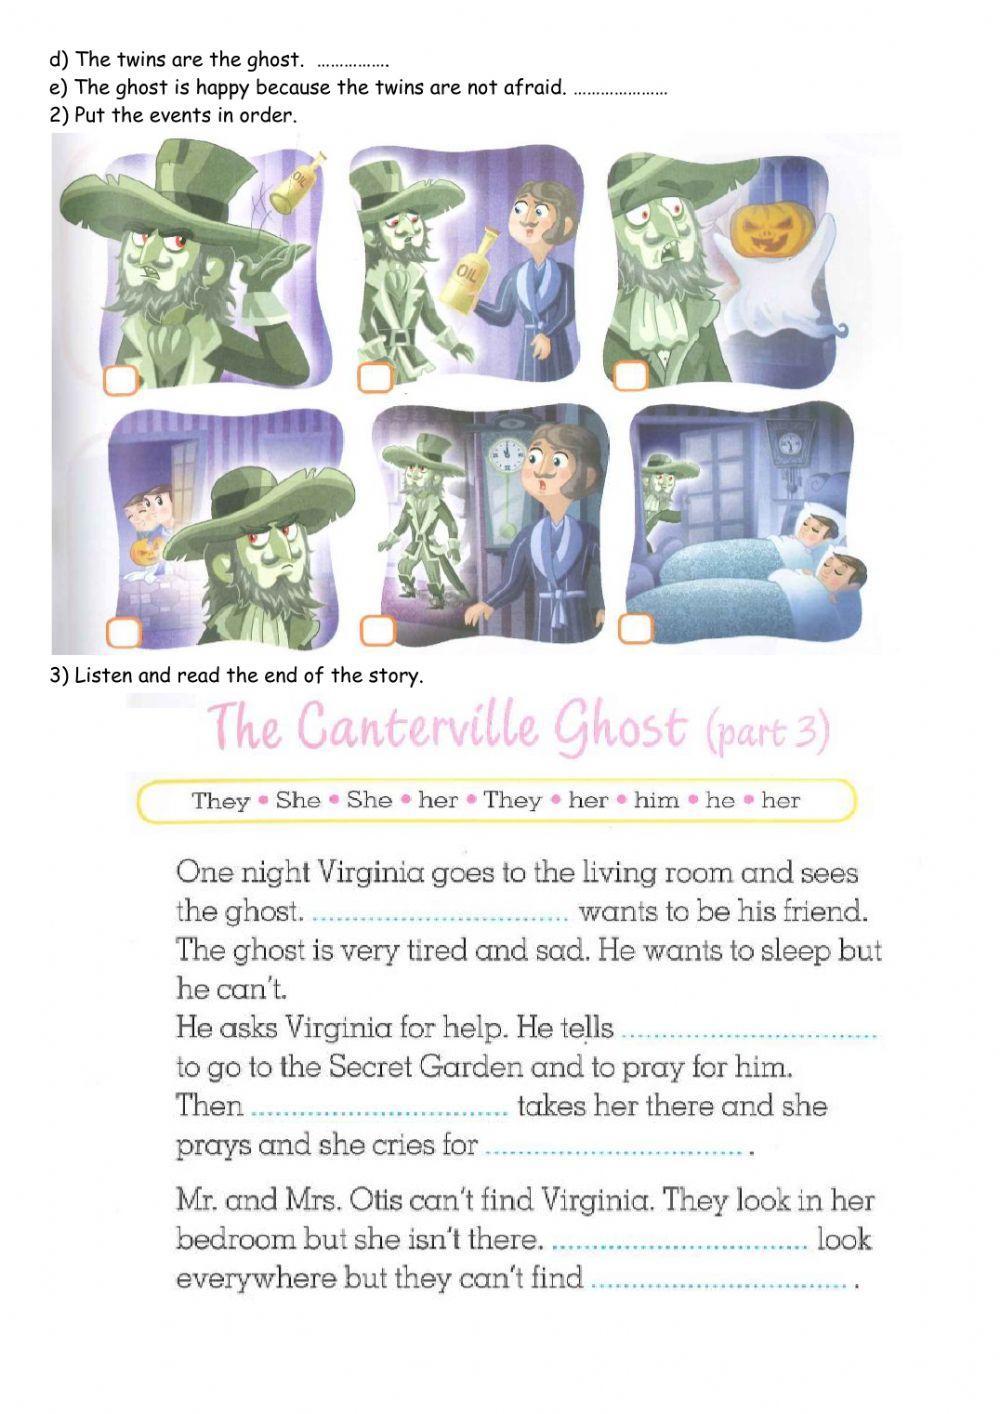 The canterville ghost part2 and 3